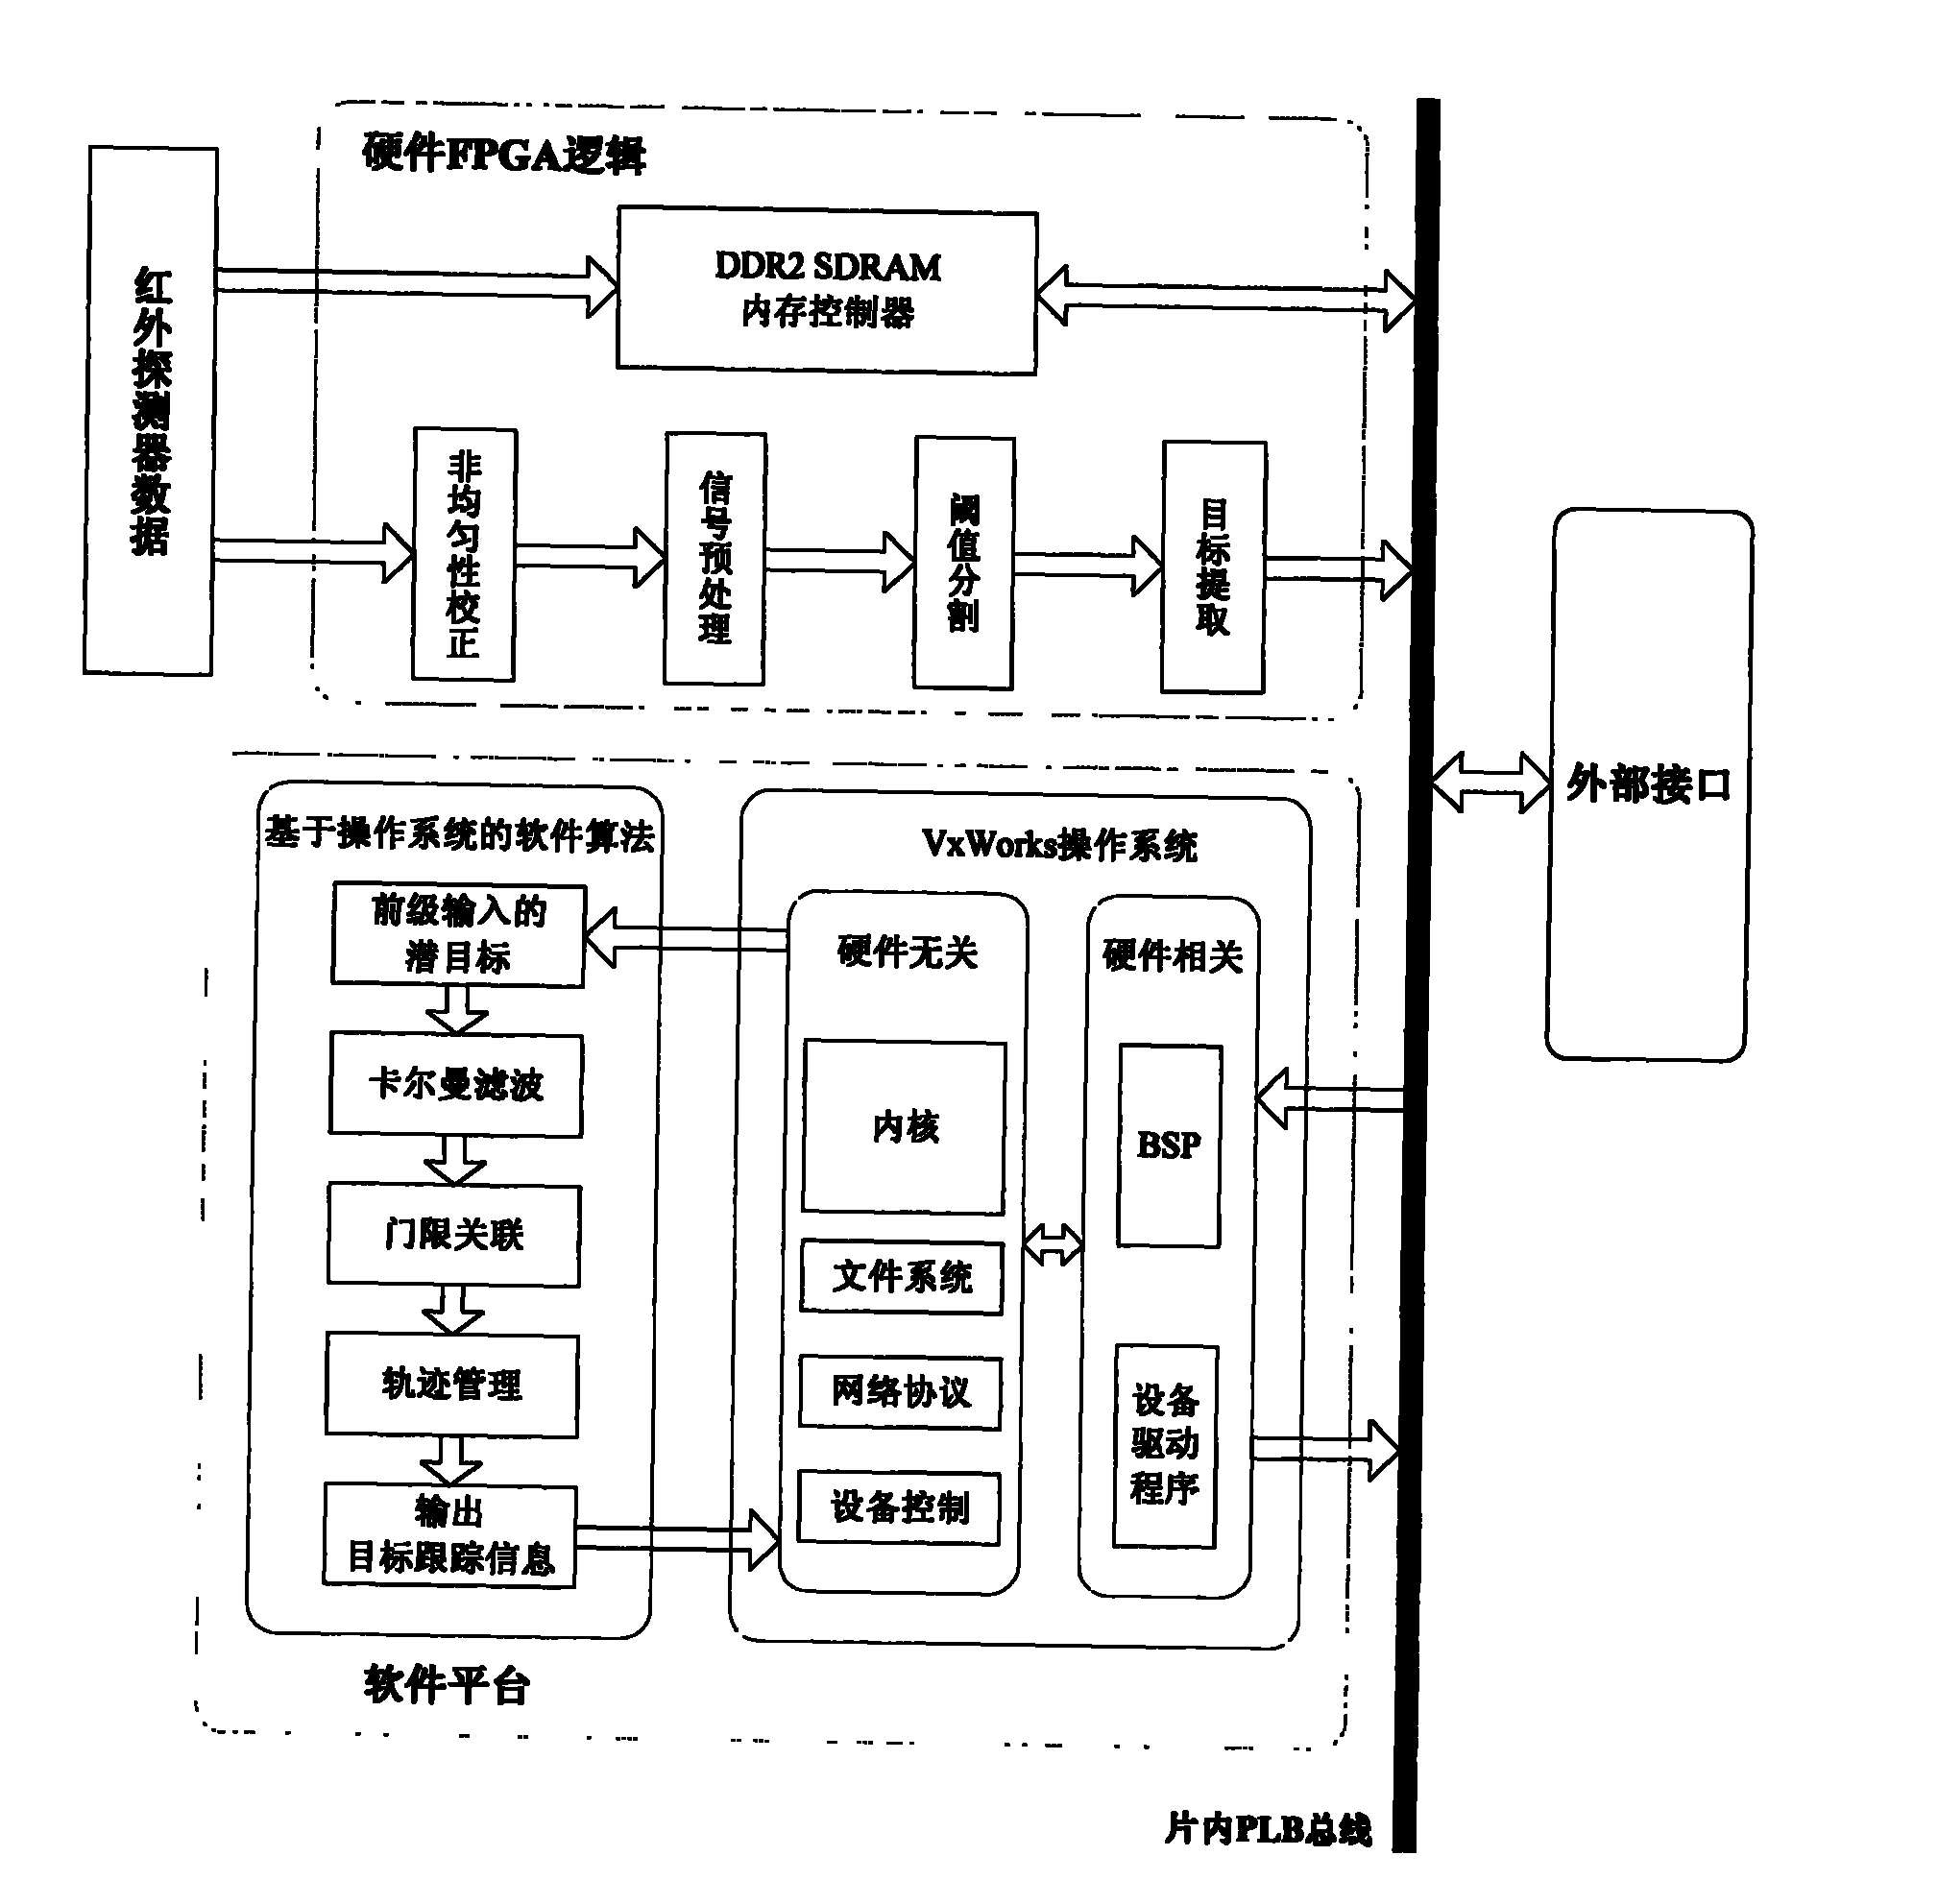 Embedded infrared real-time signal processing system